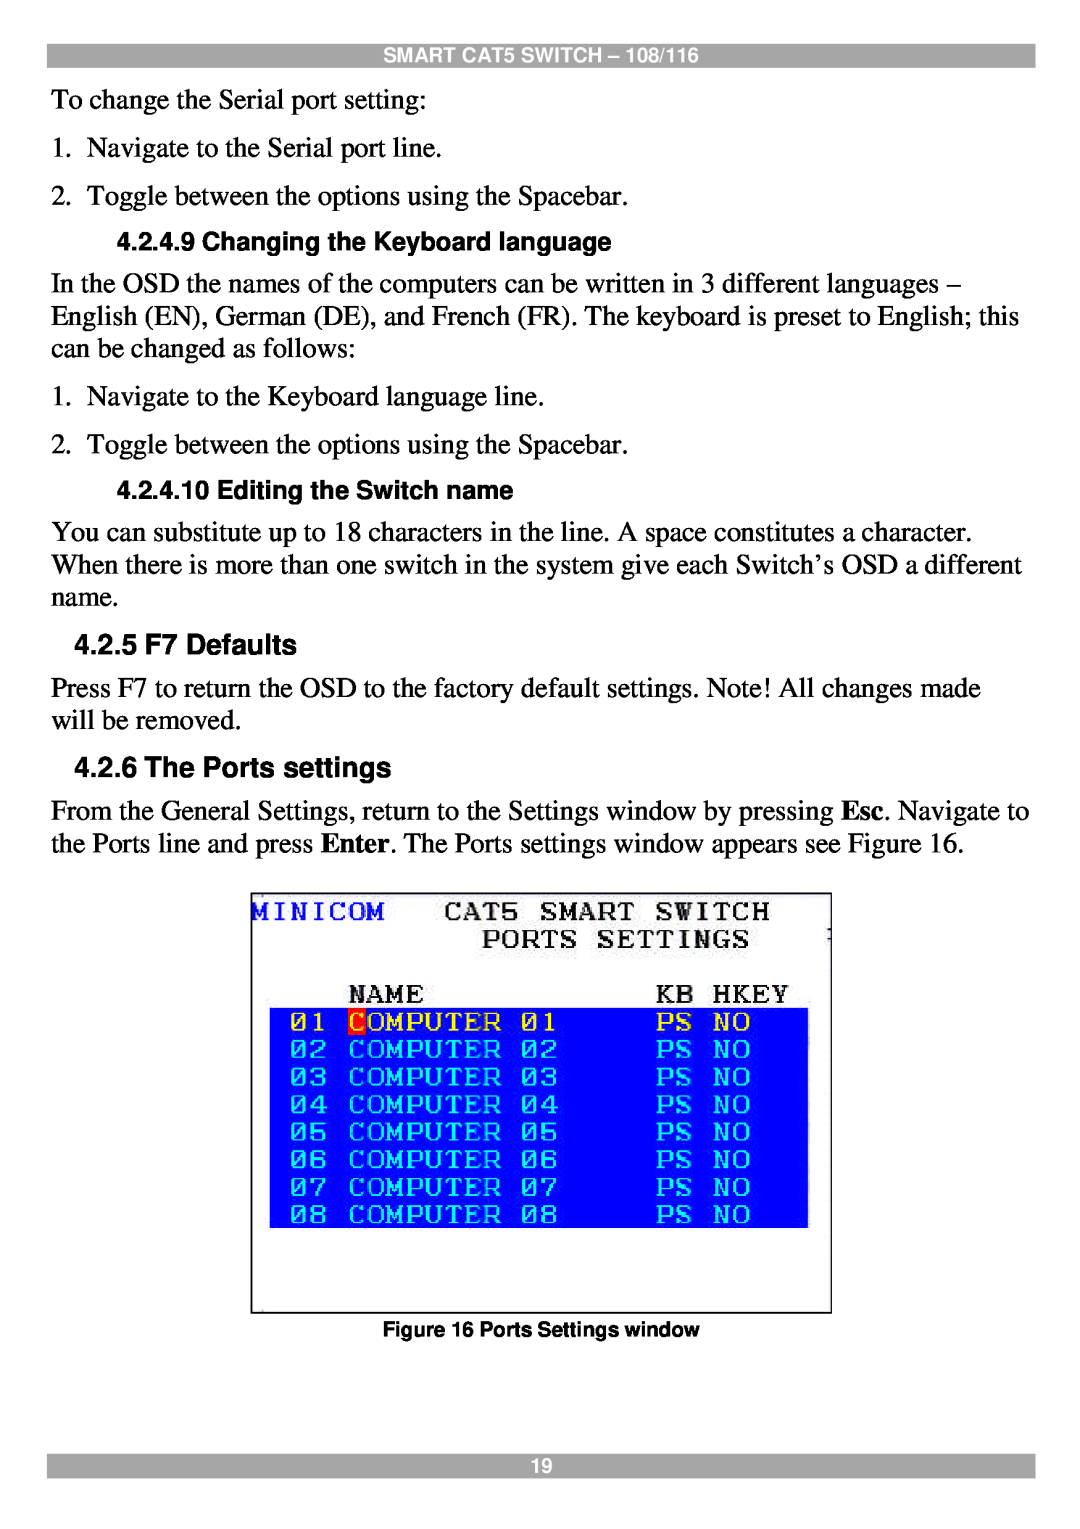 Tripp Lite 108, 116 manual 4.2.5 F7 Defaults, The Ports settings, Changing the Keyboard language, Editing the Switch name 